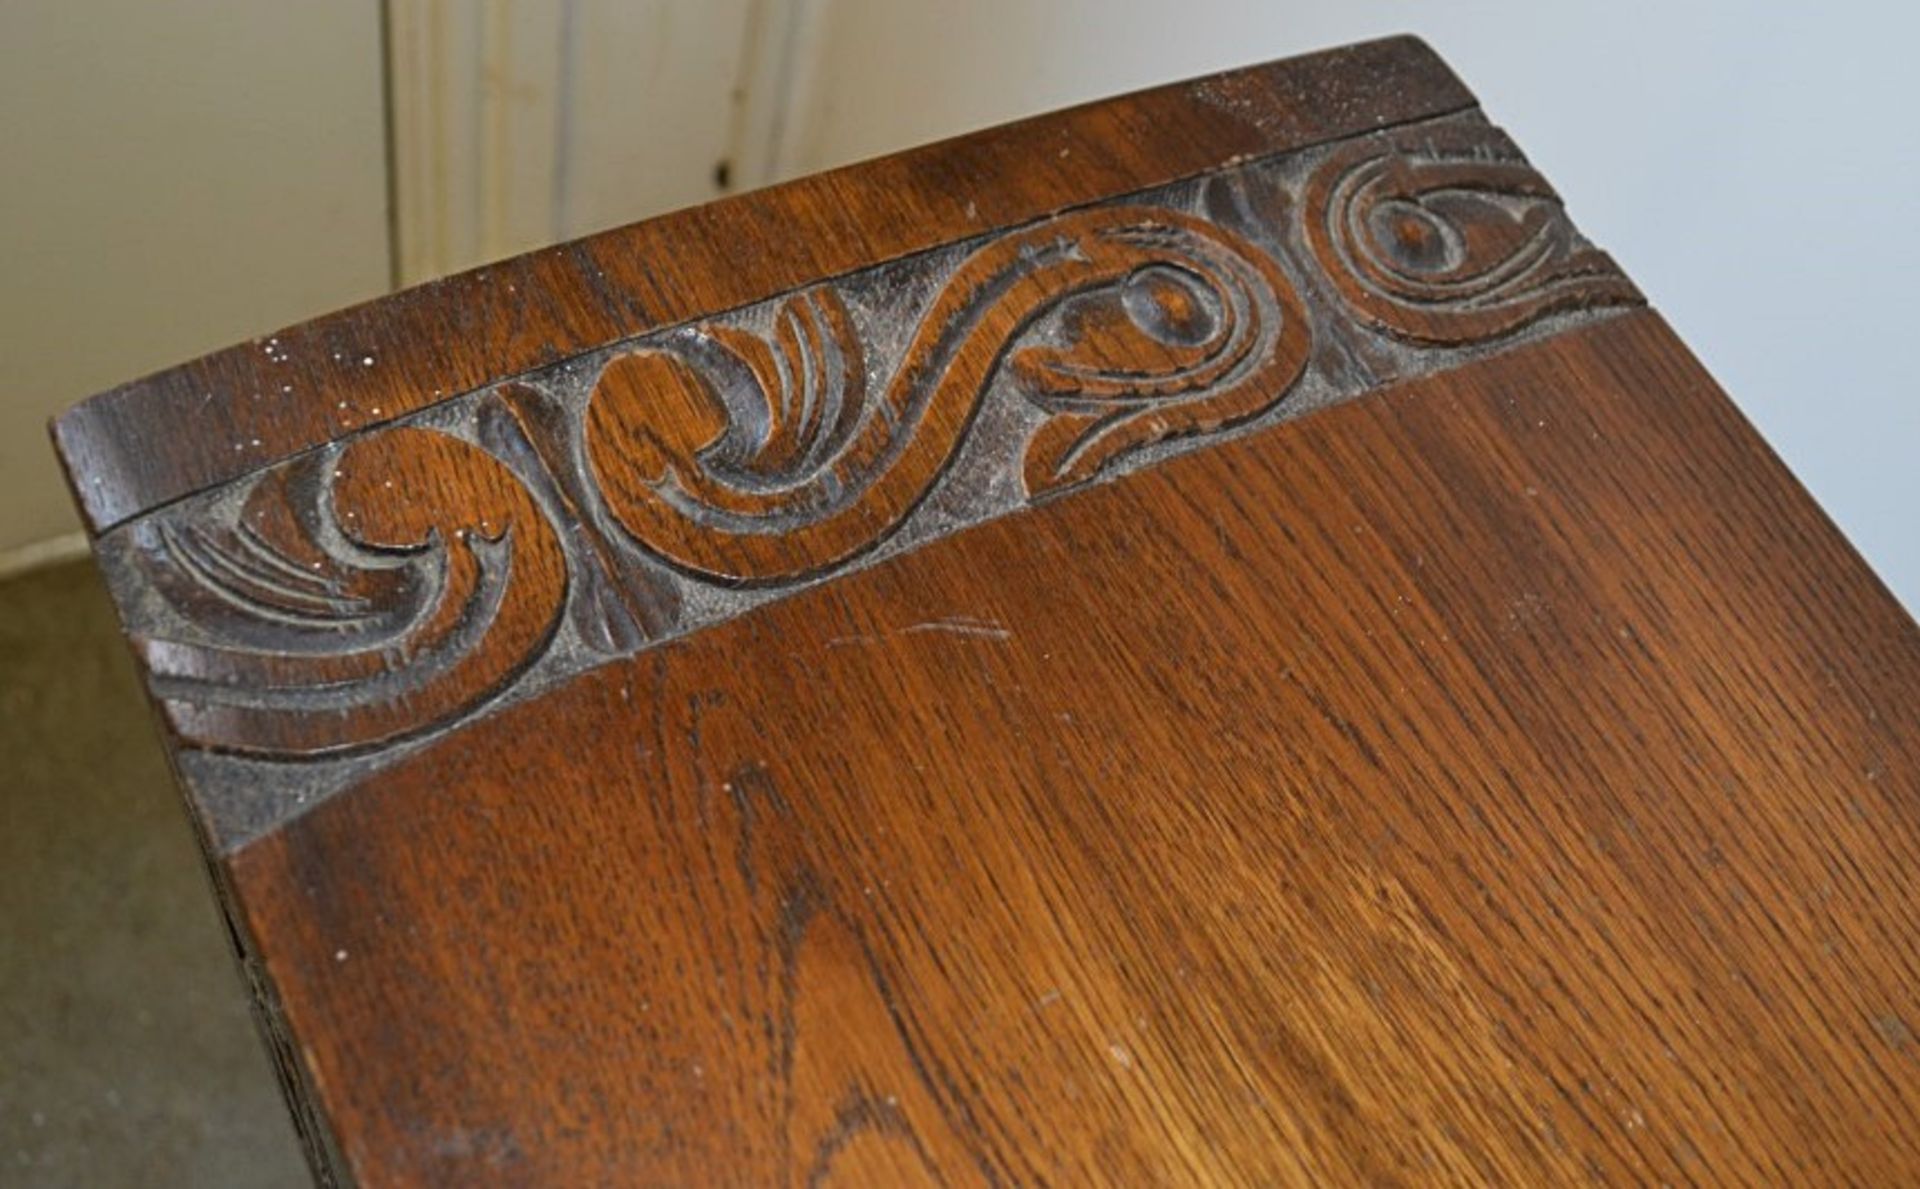 1 x Vintage Drop Leaf Solid Wood Table With Carved Floral Decoration - From A Grade II Listed Hall - Image 4 of 9